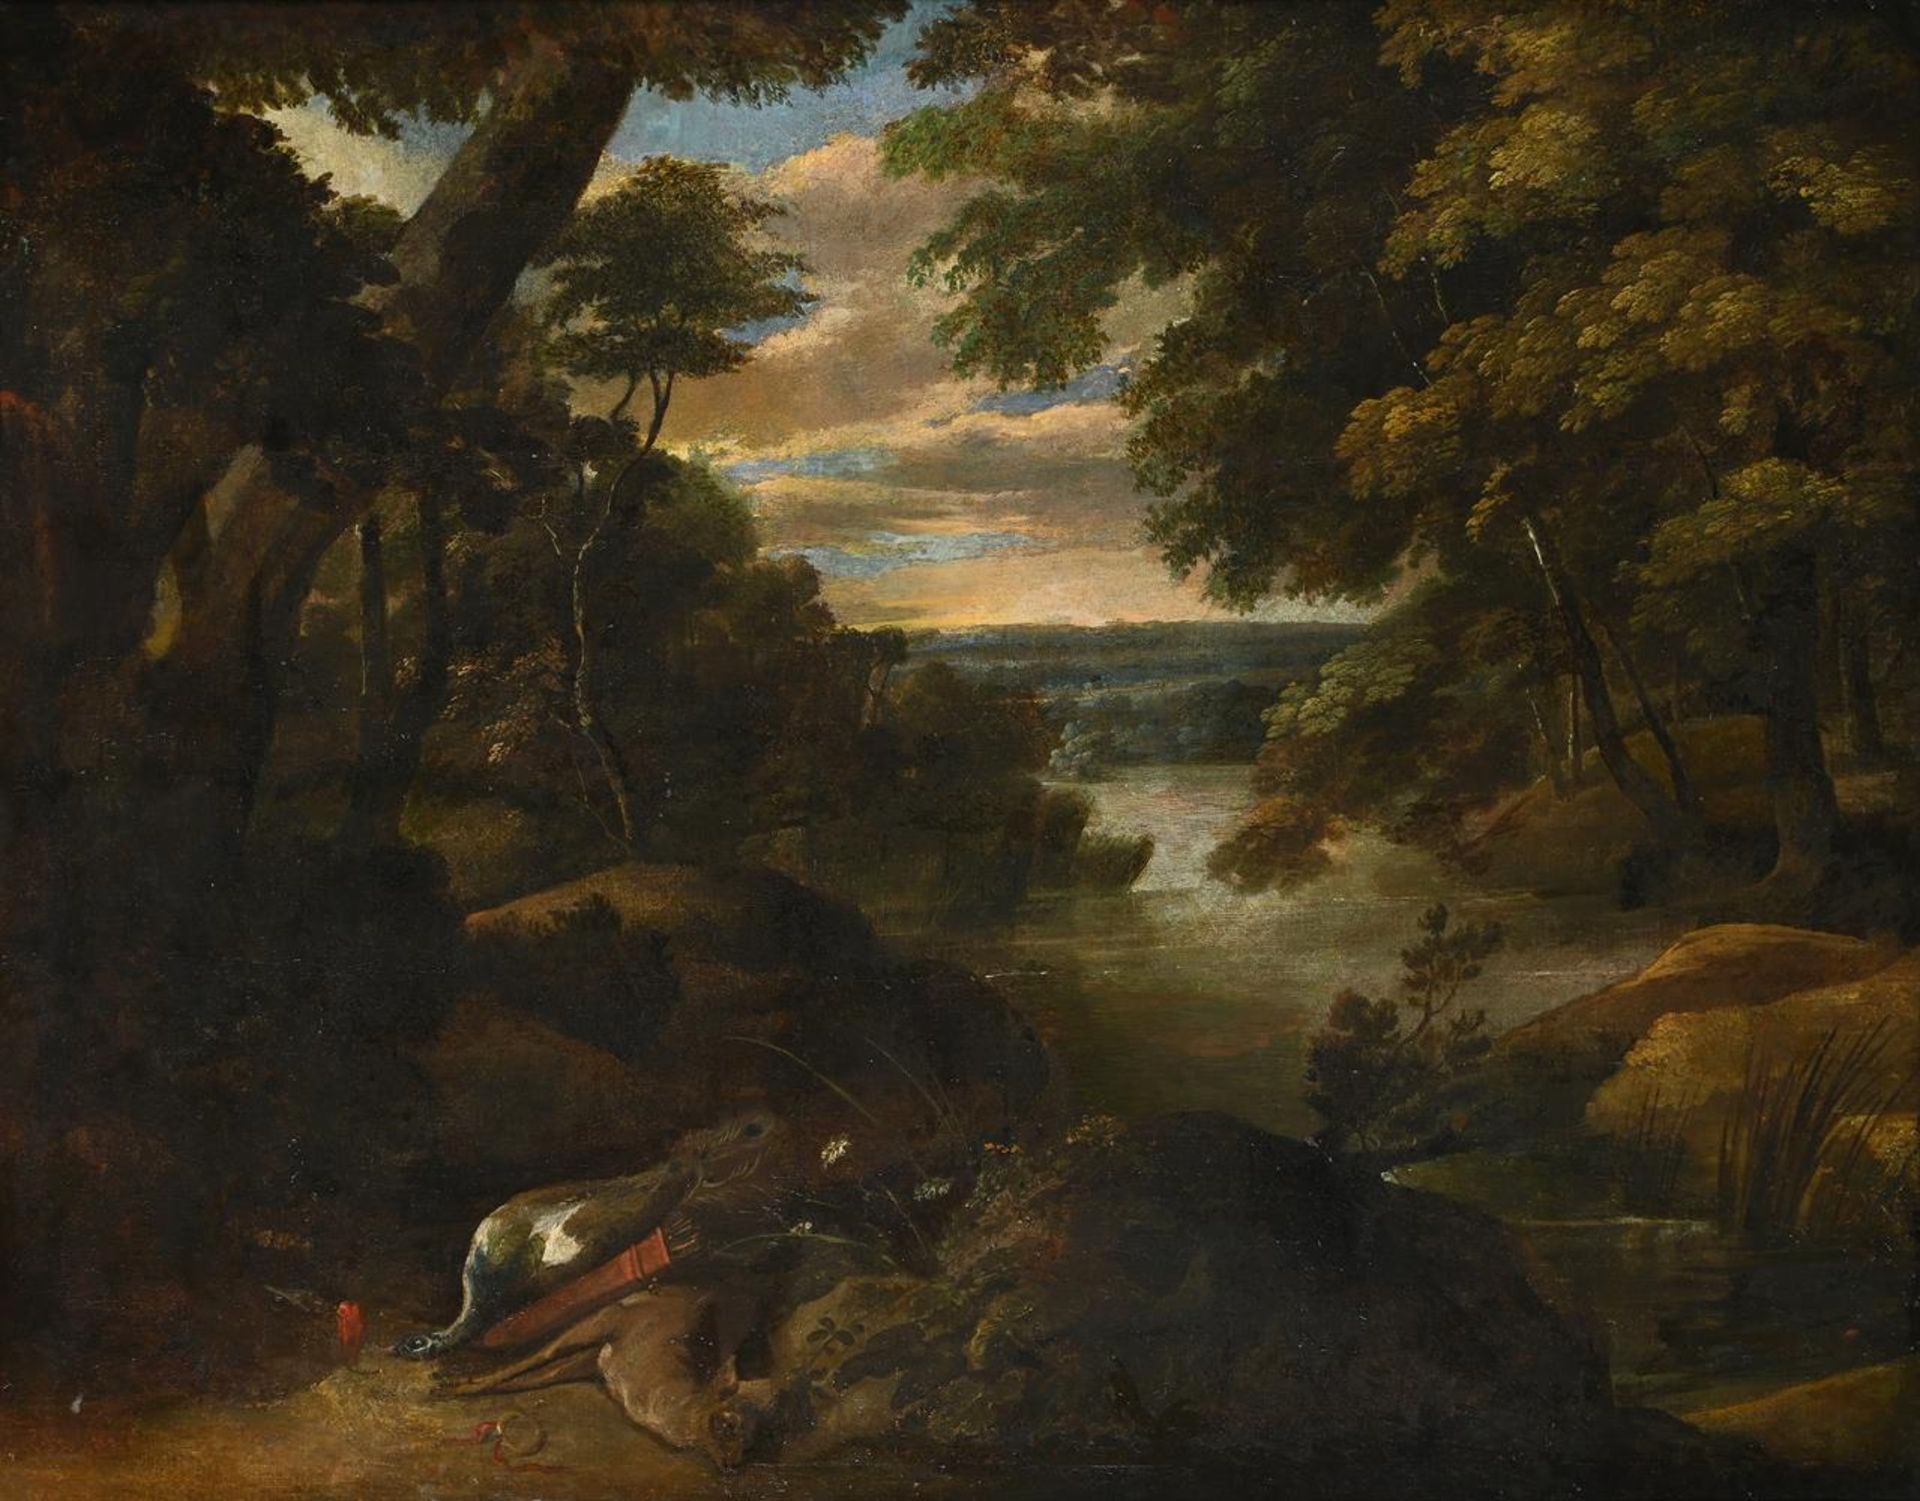 DUTCH SCHOOL (17TH CENTURY), A STILL LIFE OF DEAD GAME IN A LANDSCAPE - Image 2 of 3